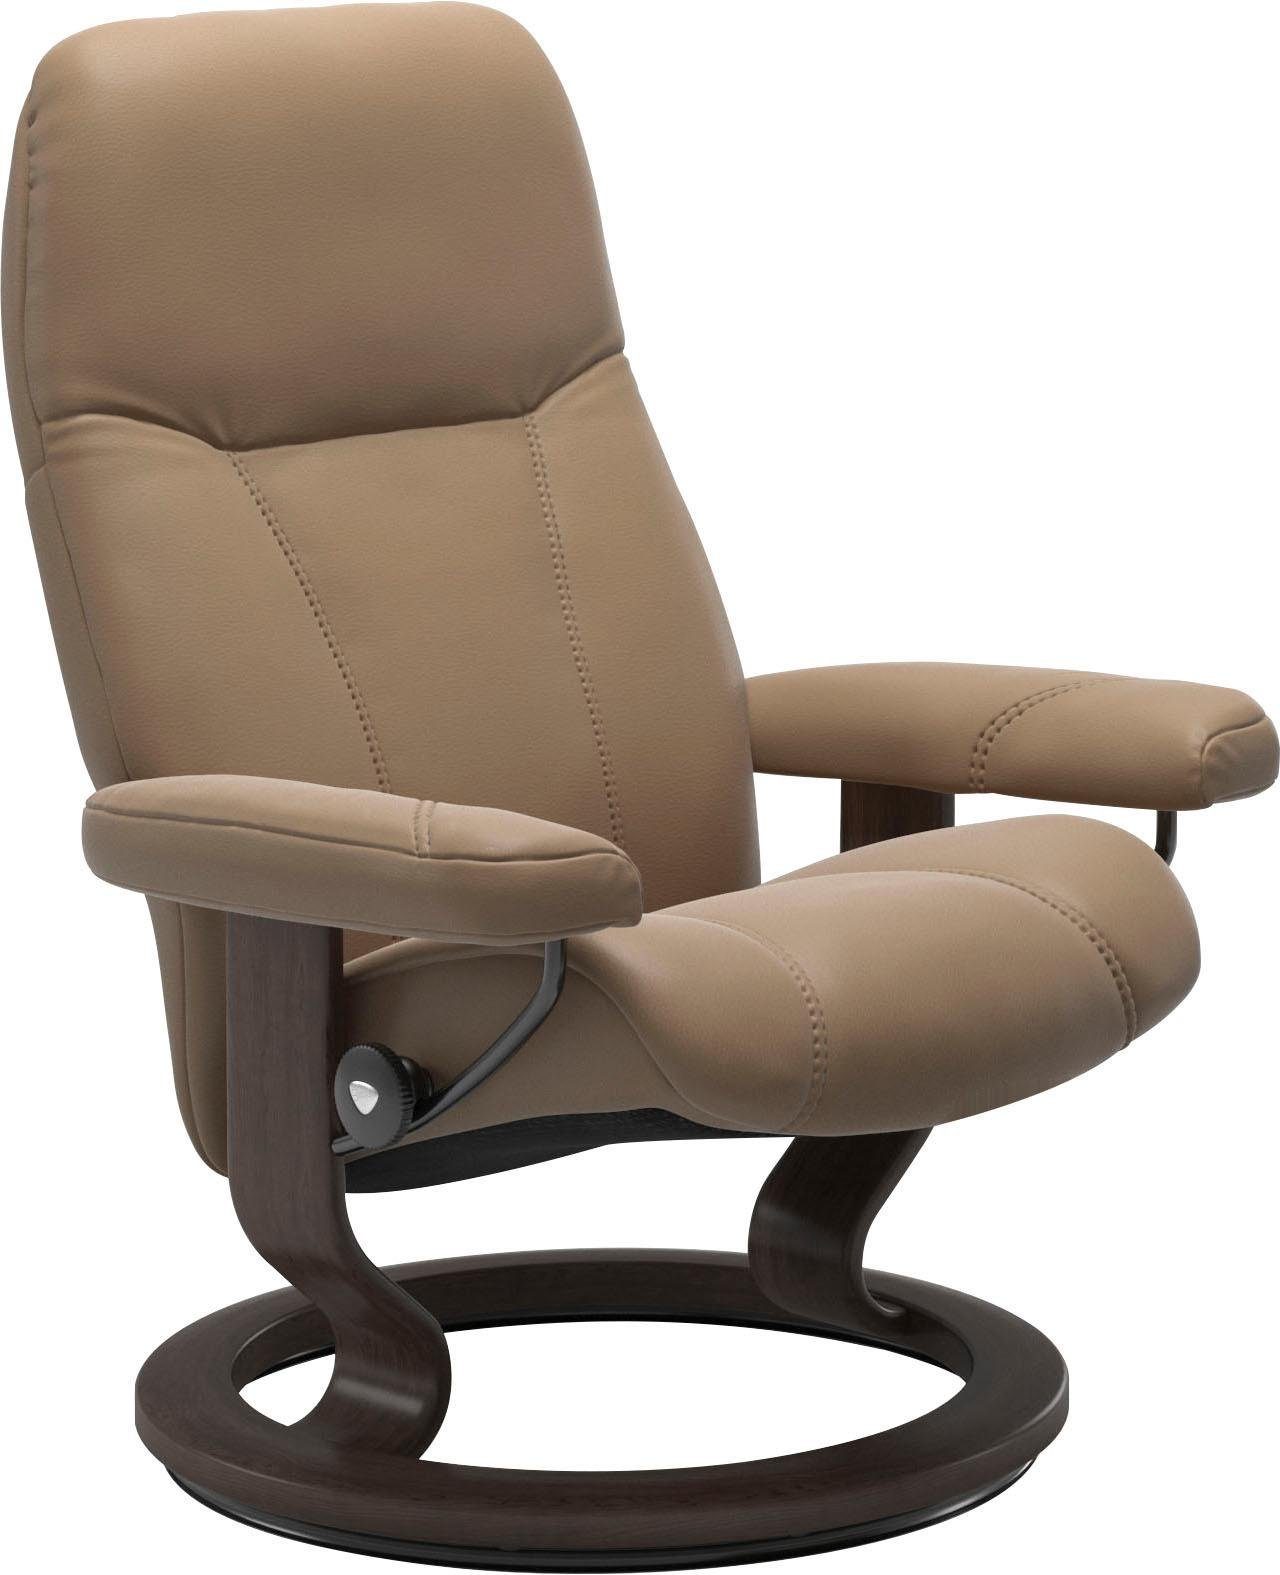 Relaxsessel mit Gestell Größe Stressless® L, Classic Base, Wenge Consul,